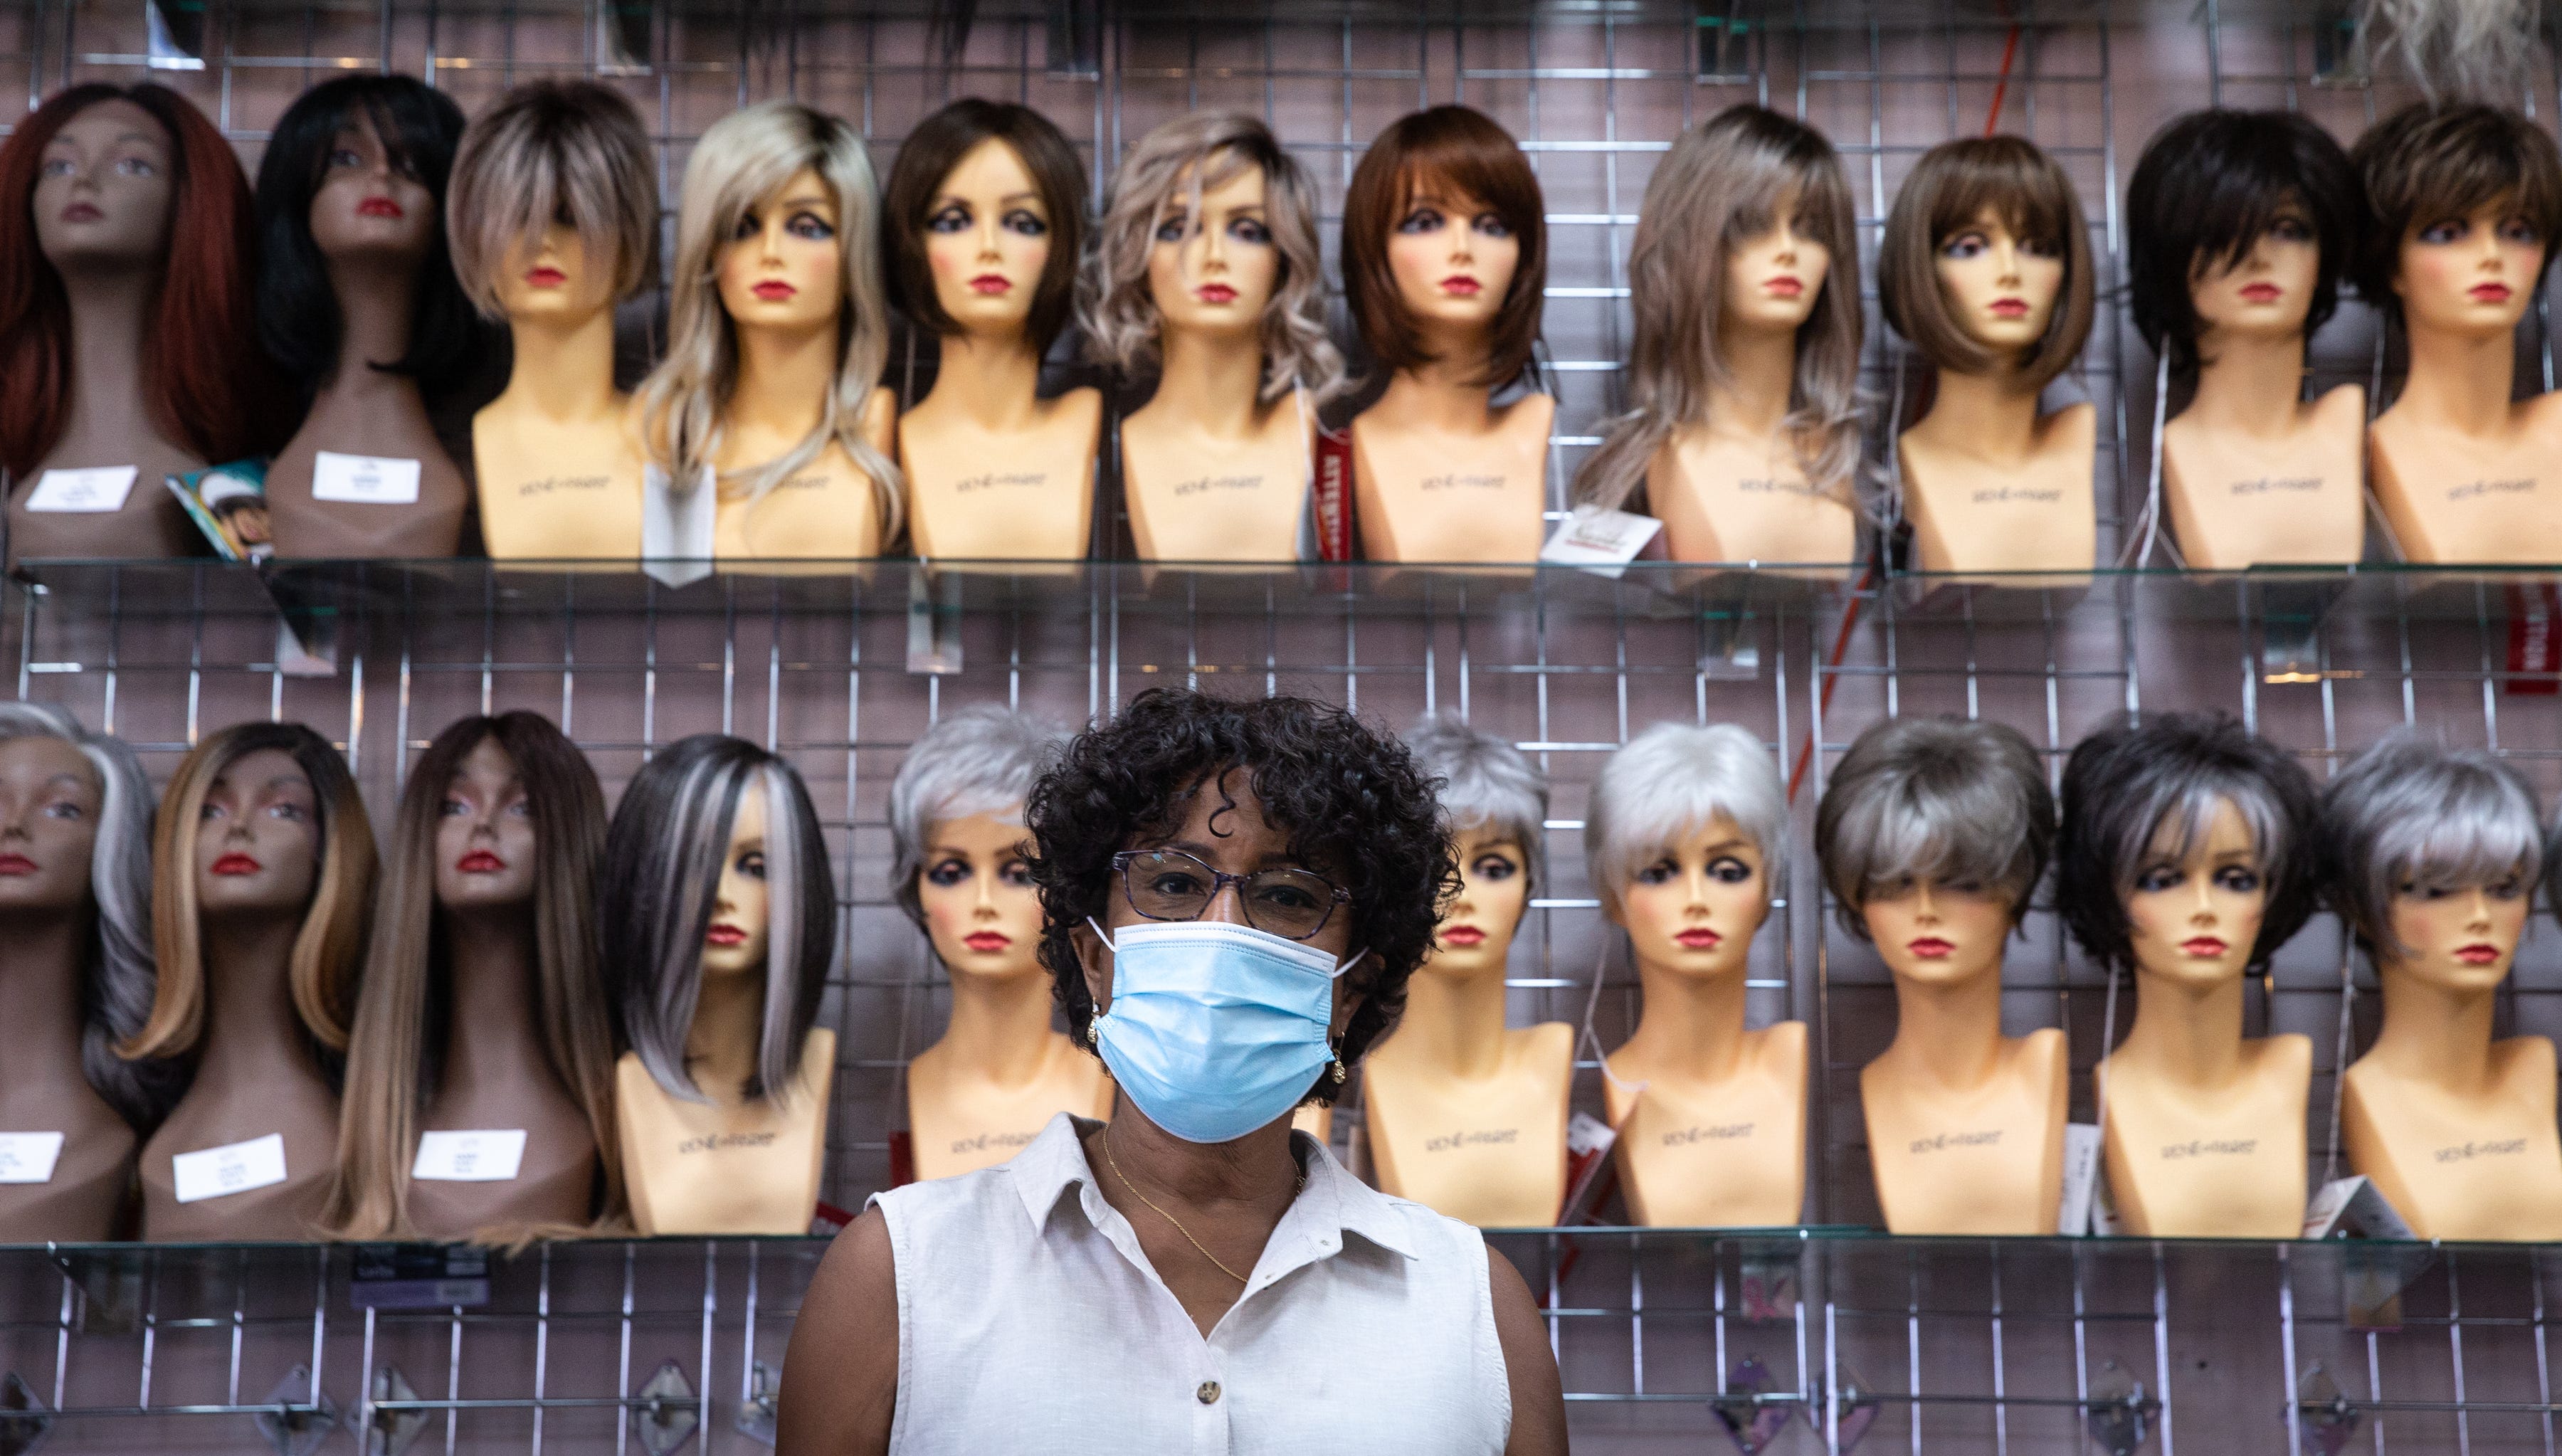 Mesa wig shop targeted by anti-mask group enjoys outpouring of support